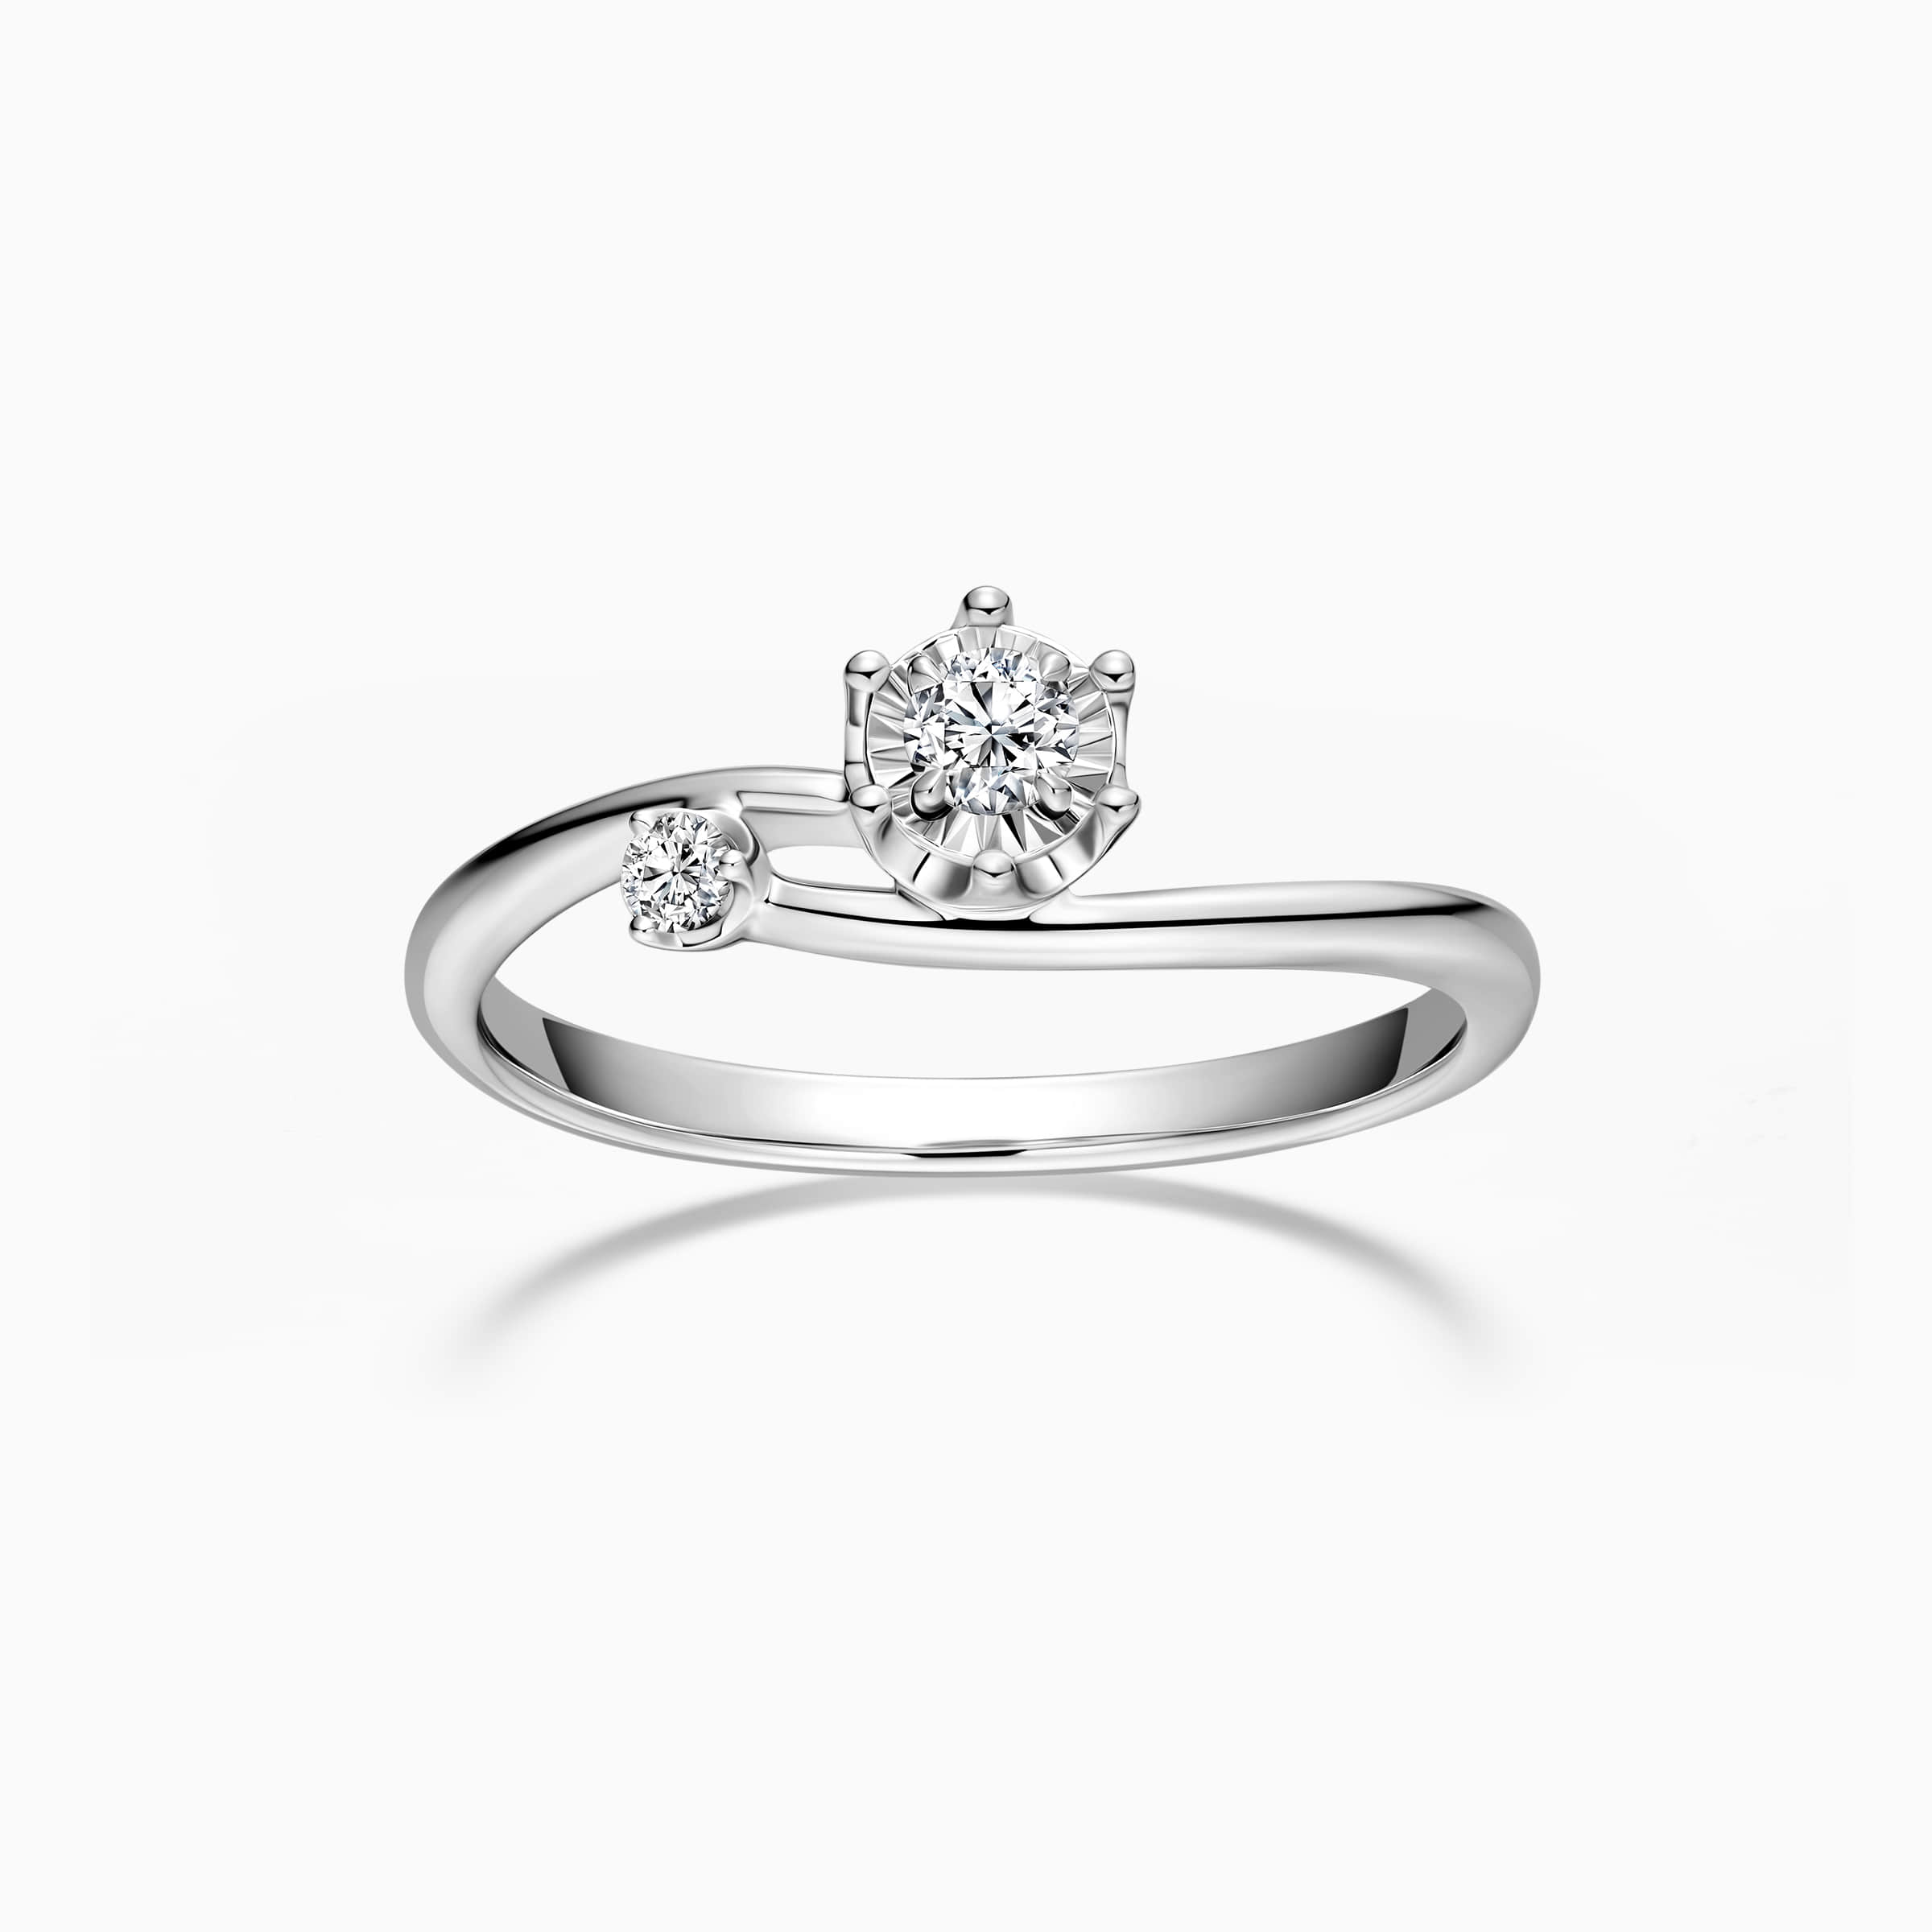 Darry Ring 2 stone bypass promise ring white gold